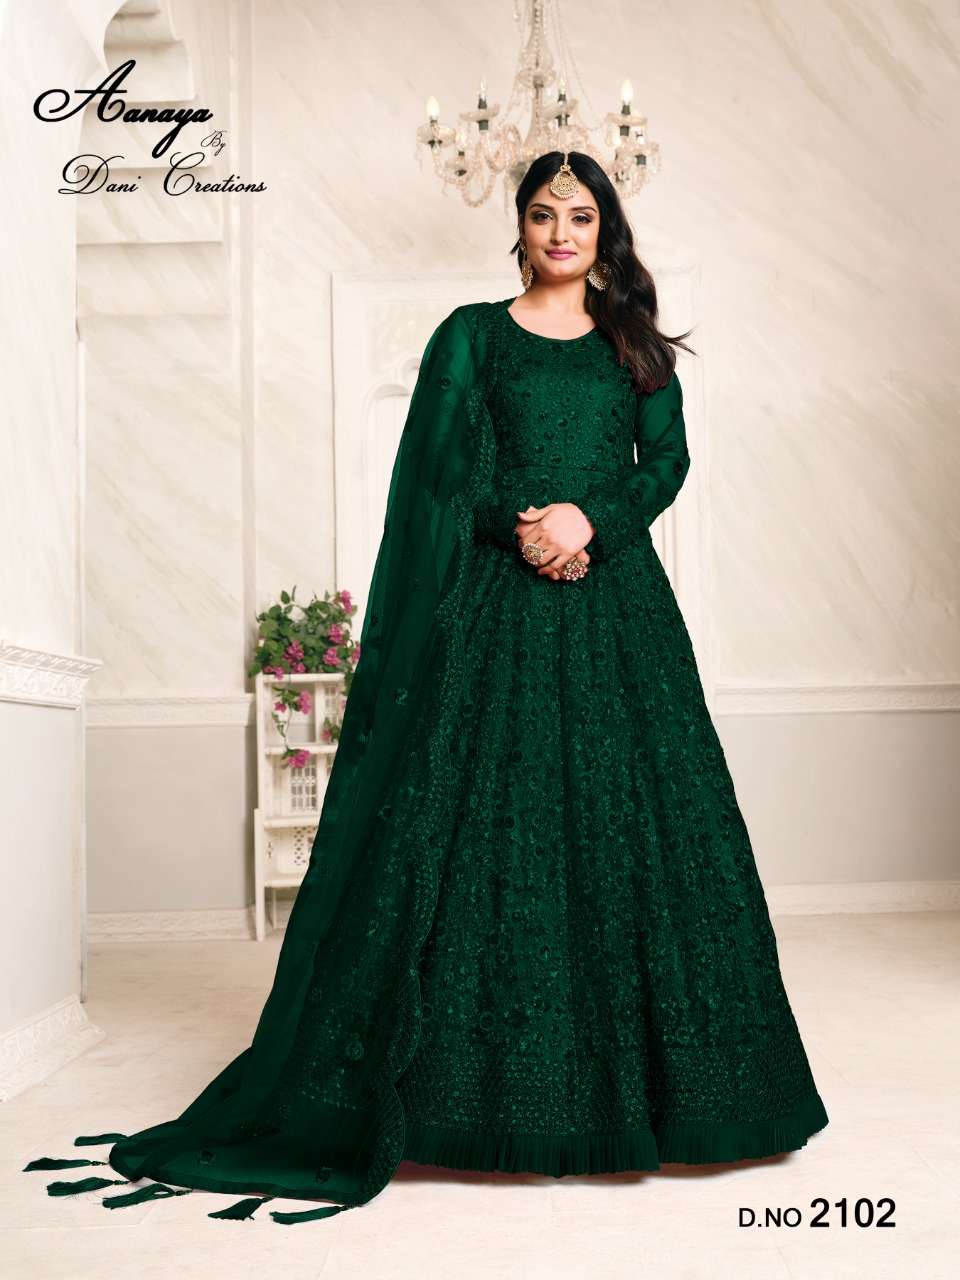 aanya by dani creation aanaya 2100 series vol 121 designer partywear full beautifull embroidery anarkali gown collection for wedding or festive or traditional wear  